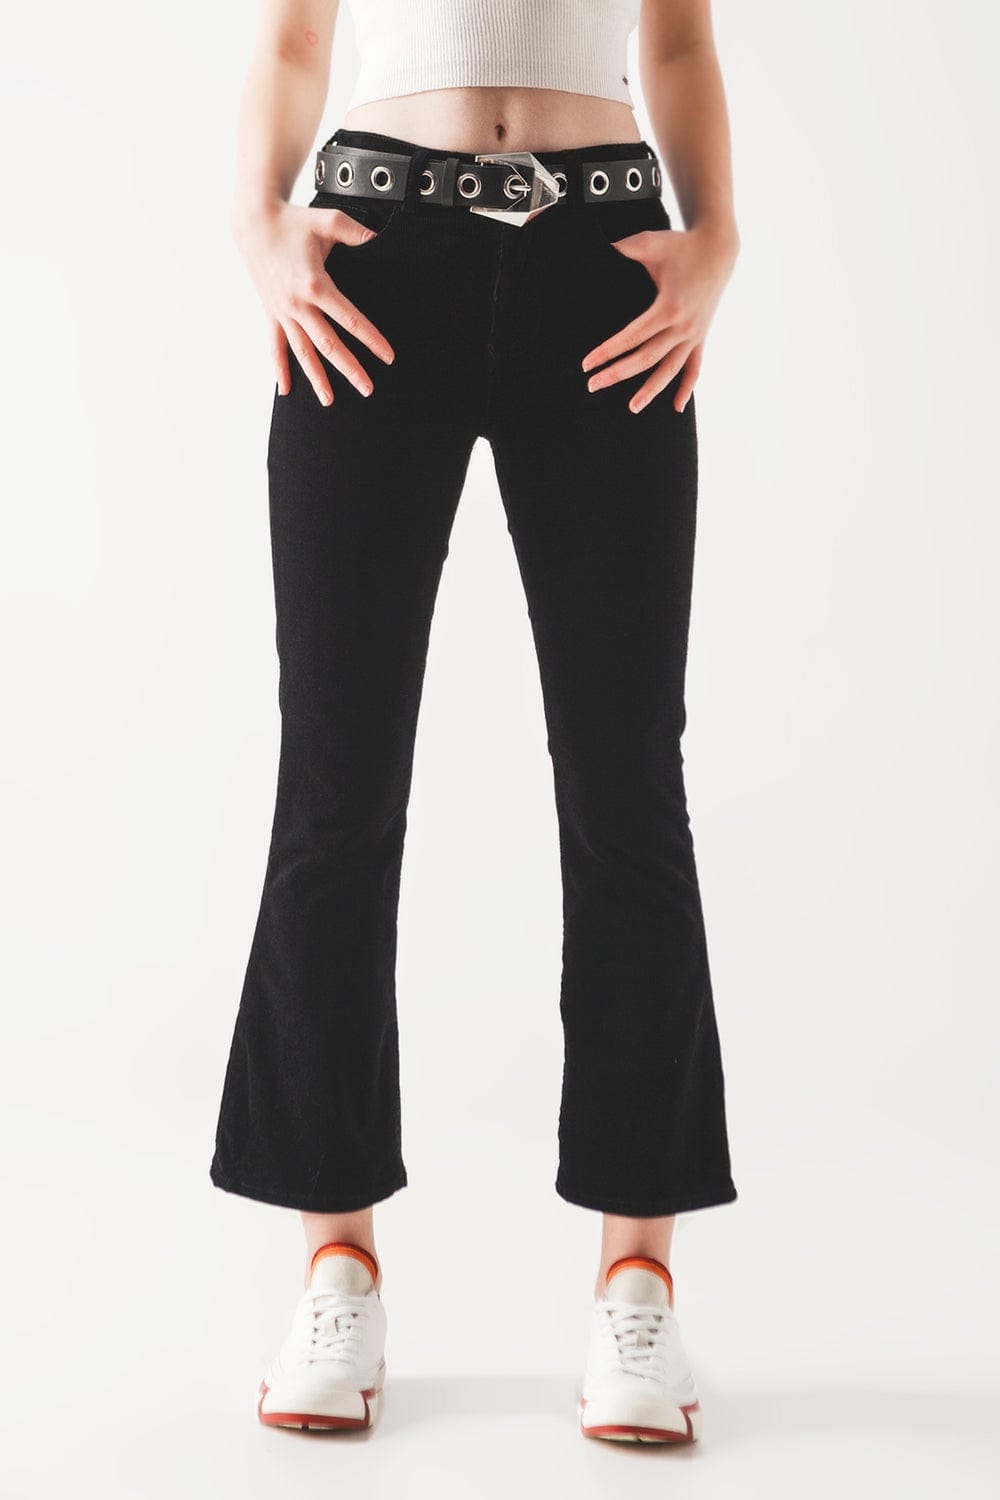 Q2 Women's Pants & Trousers Cord Flare in Black